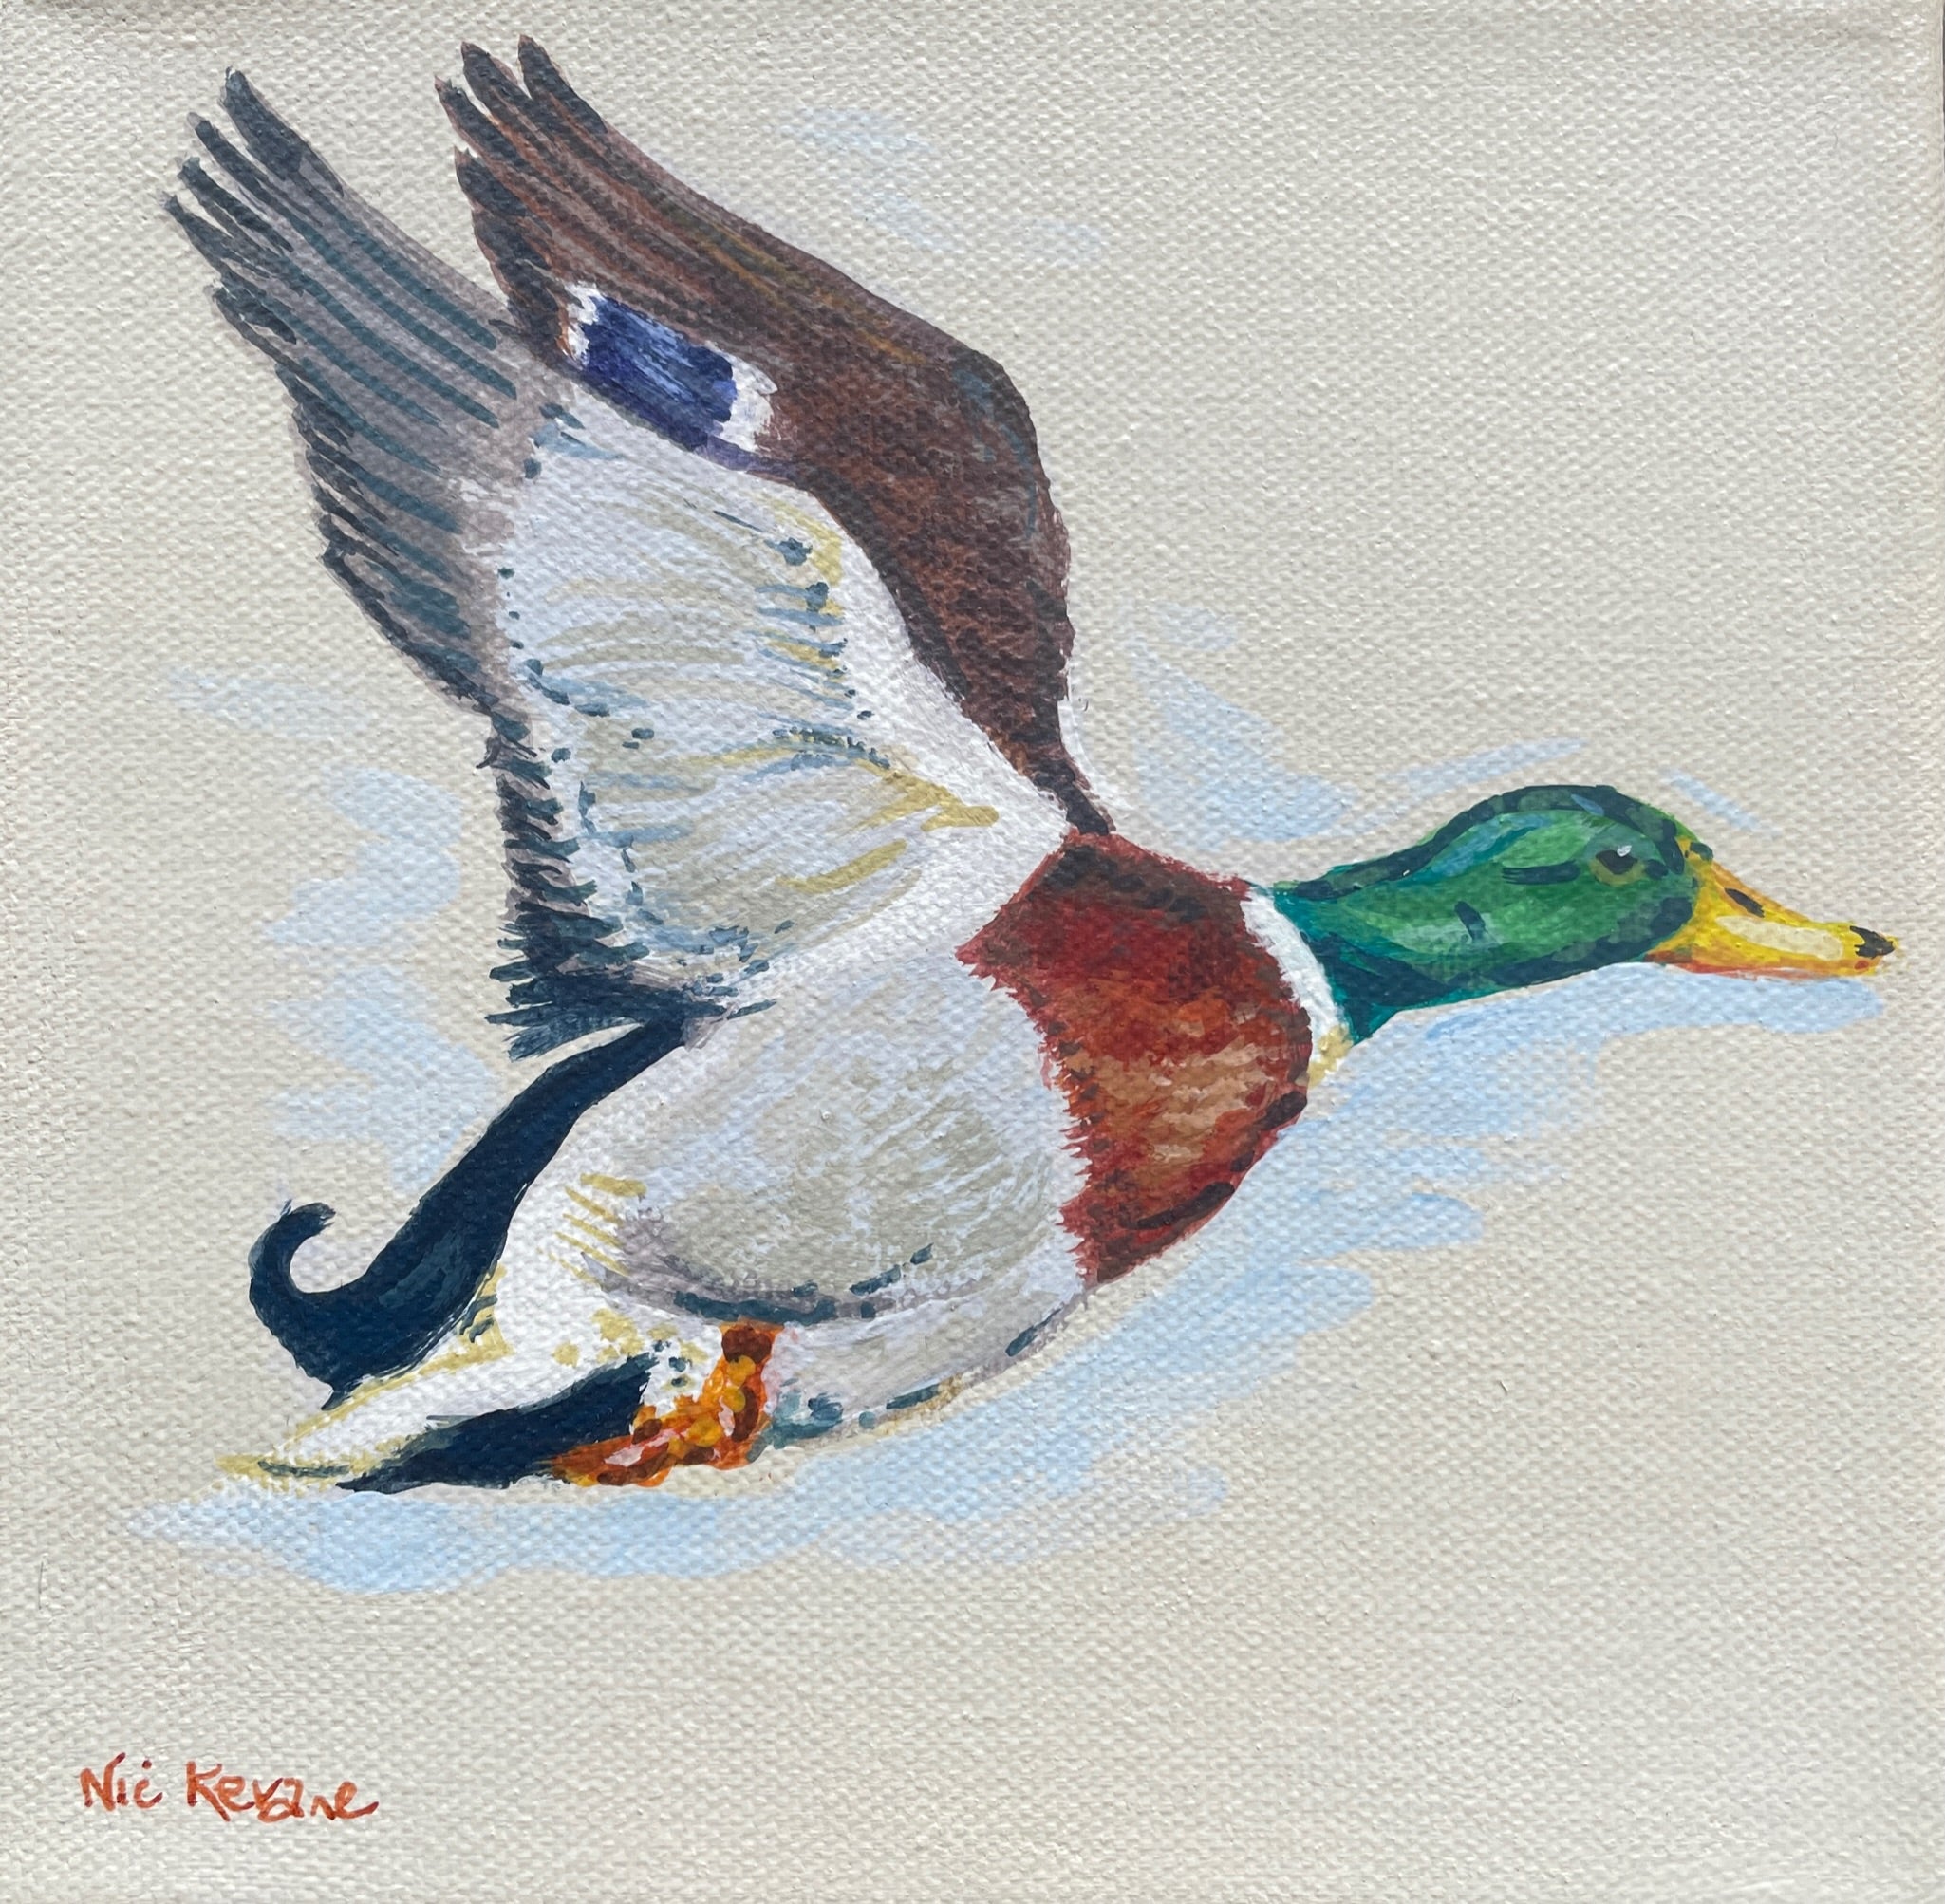 Flying Ducks - My mini paintings depict various countryside subjects painted on soft off-white backgrounds.